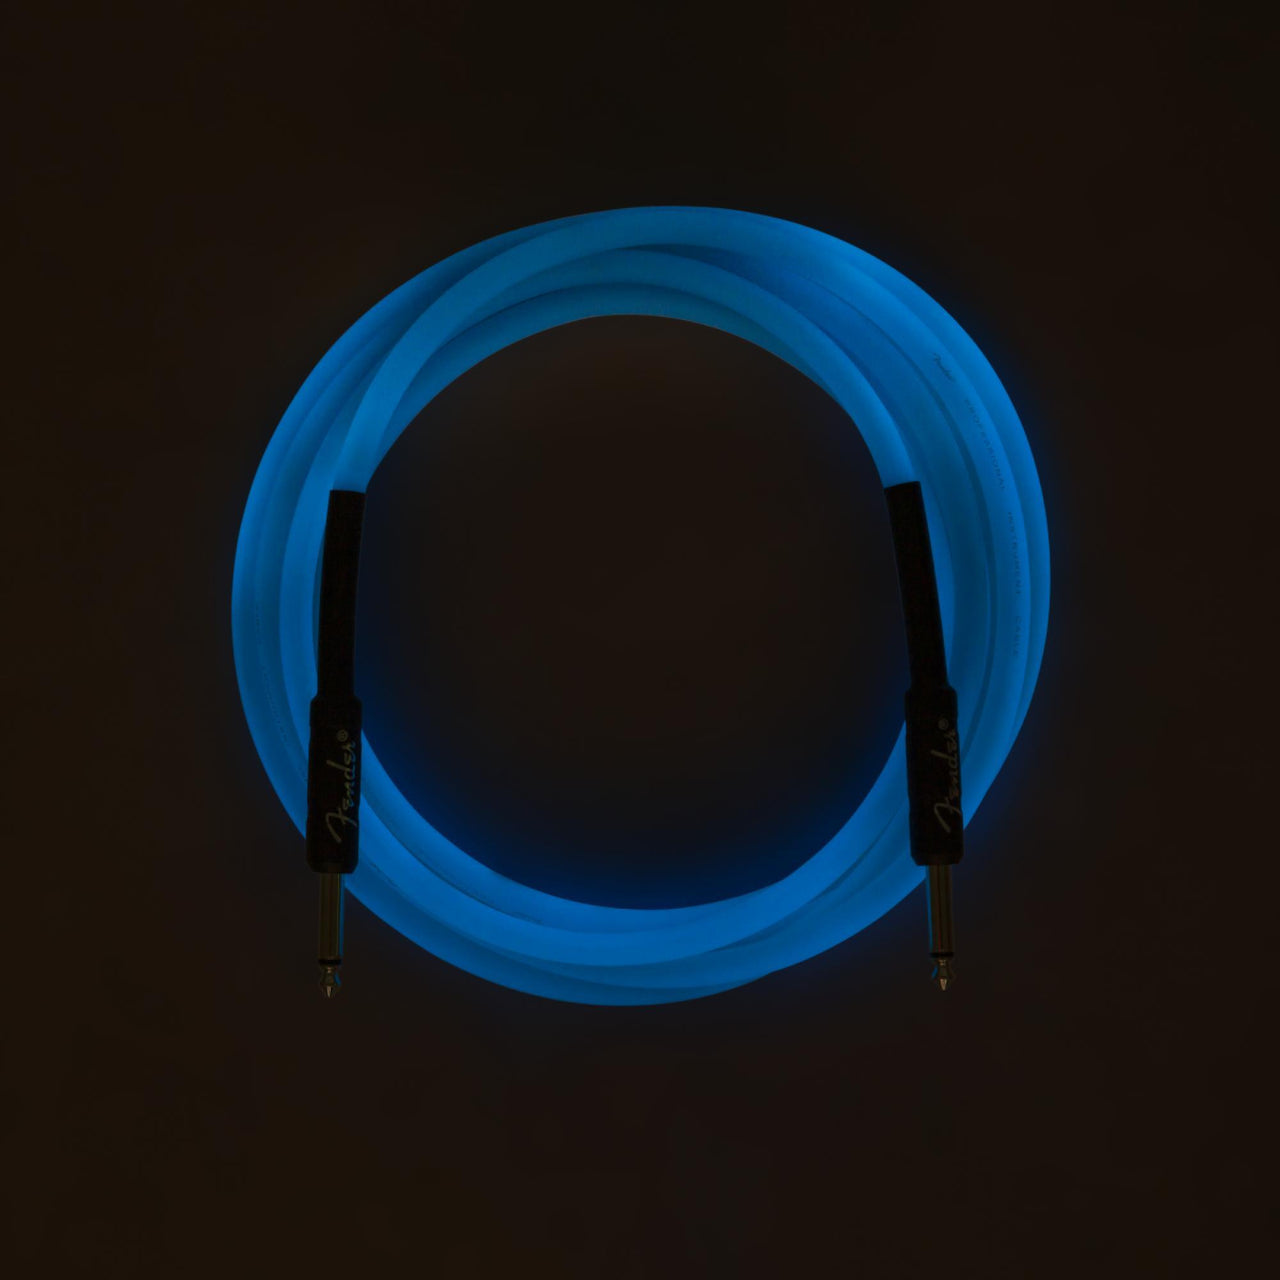 Cable Fender Glow In Dark Cbl Blue 5.5mts, 0990818108